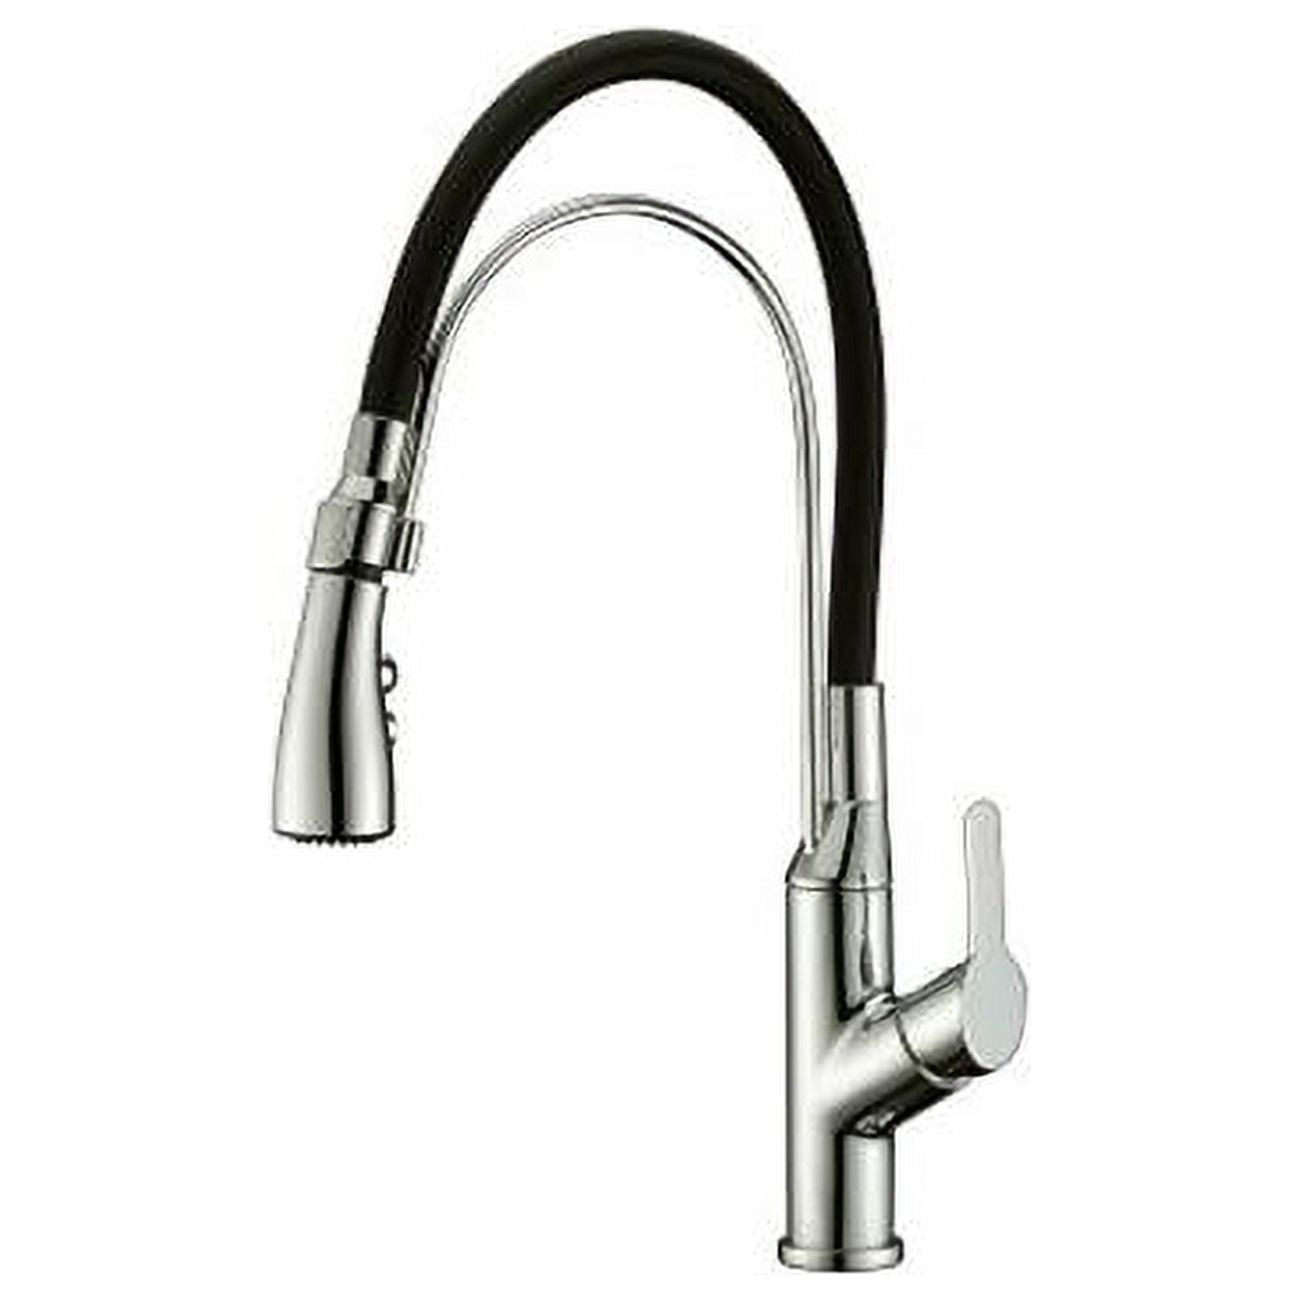 Ab50 3729bn Single-lever Pull-out Kitchen Faucet, Brushed Nickel